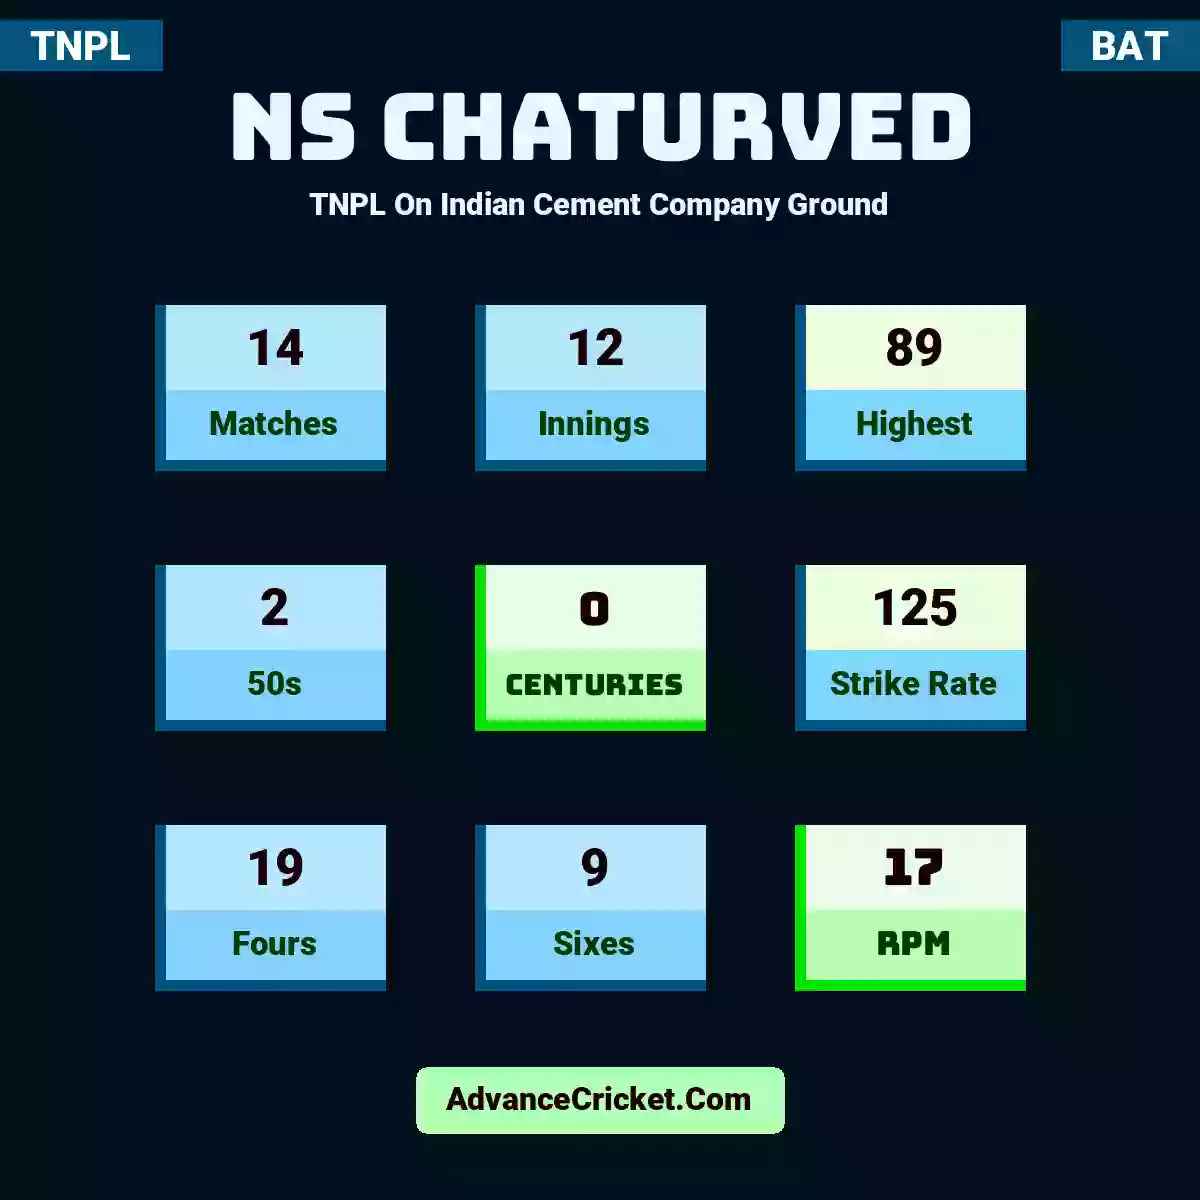 NS Chaturved TNPL  On Indian Cement Company Ground, NS Chaturved played 14 matches, scored 89 runs as highest, 2 half-centuries, and 0 centuries, with a strike rate of 125. N.Chaturved hit 19 fours and 9 sixes, with an RPM of 17.